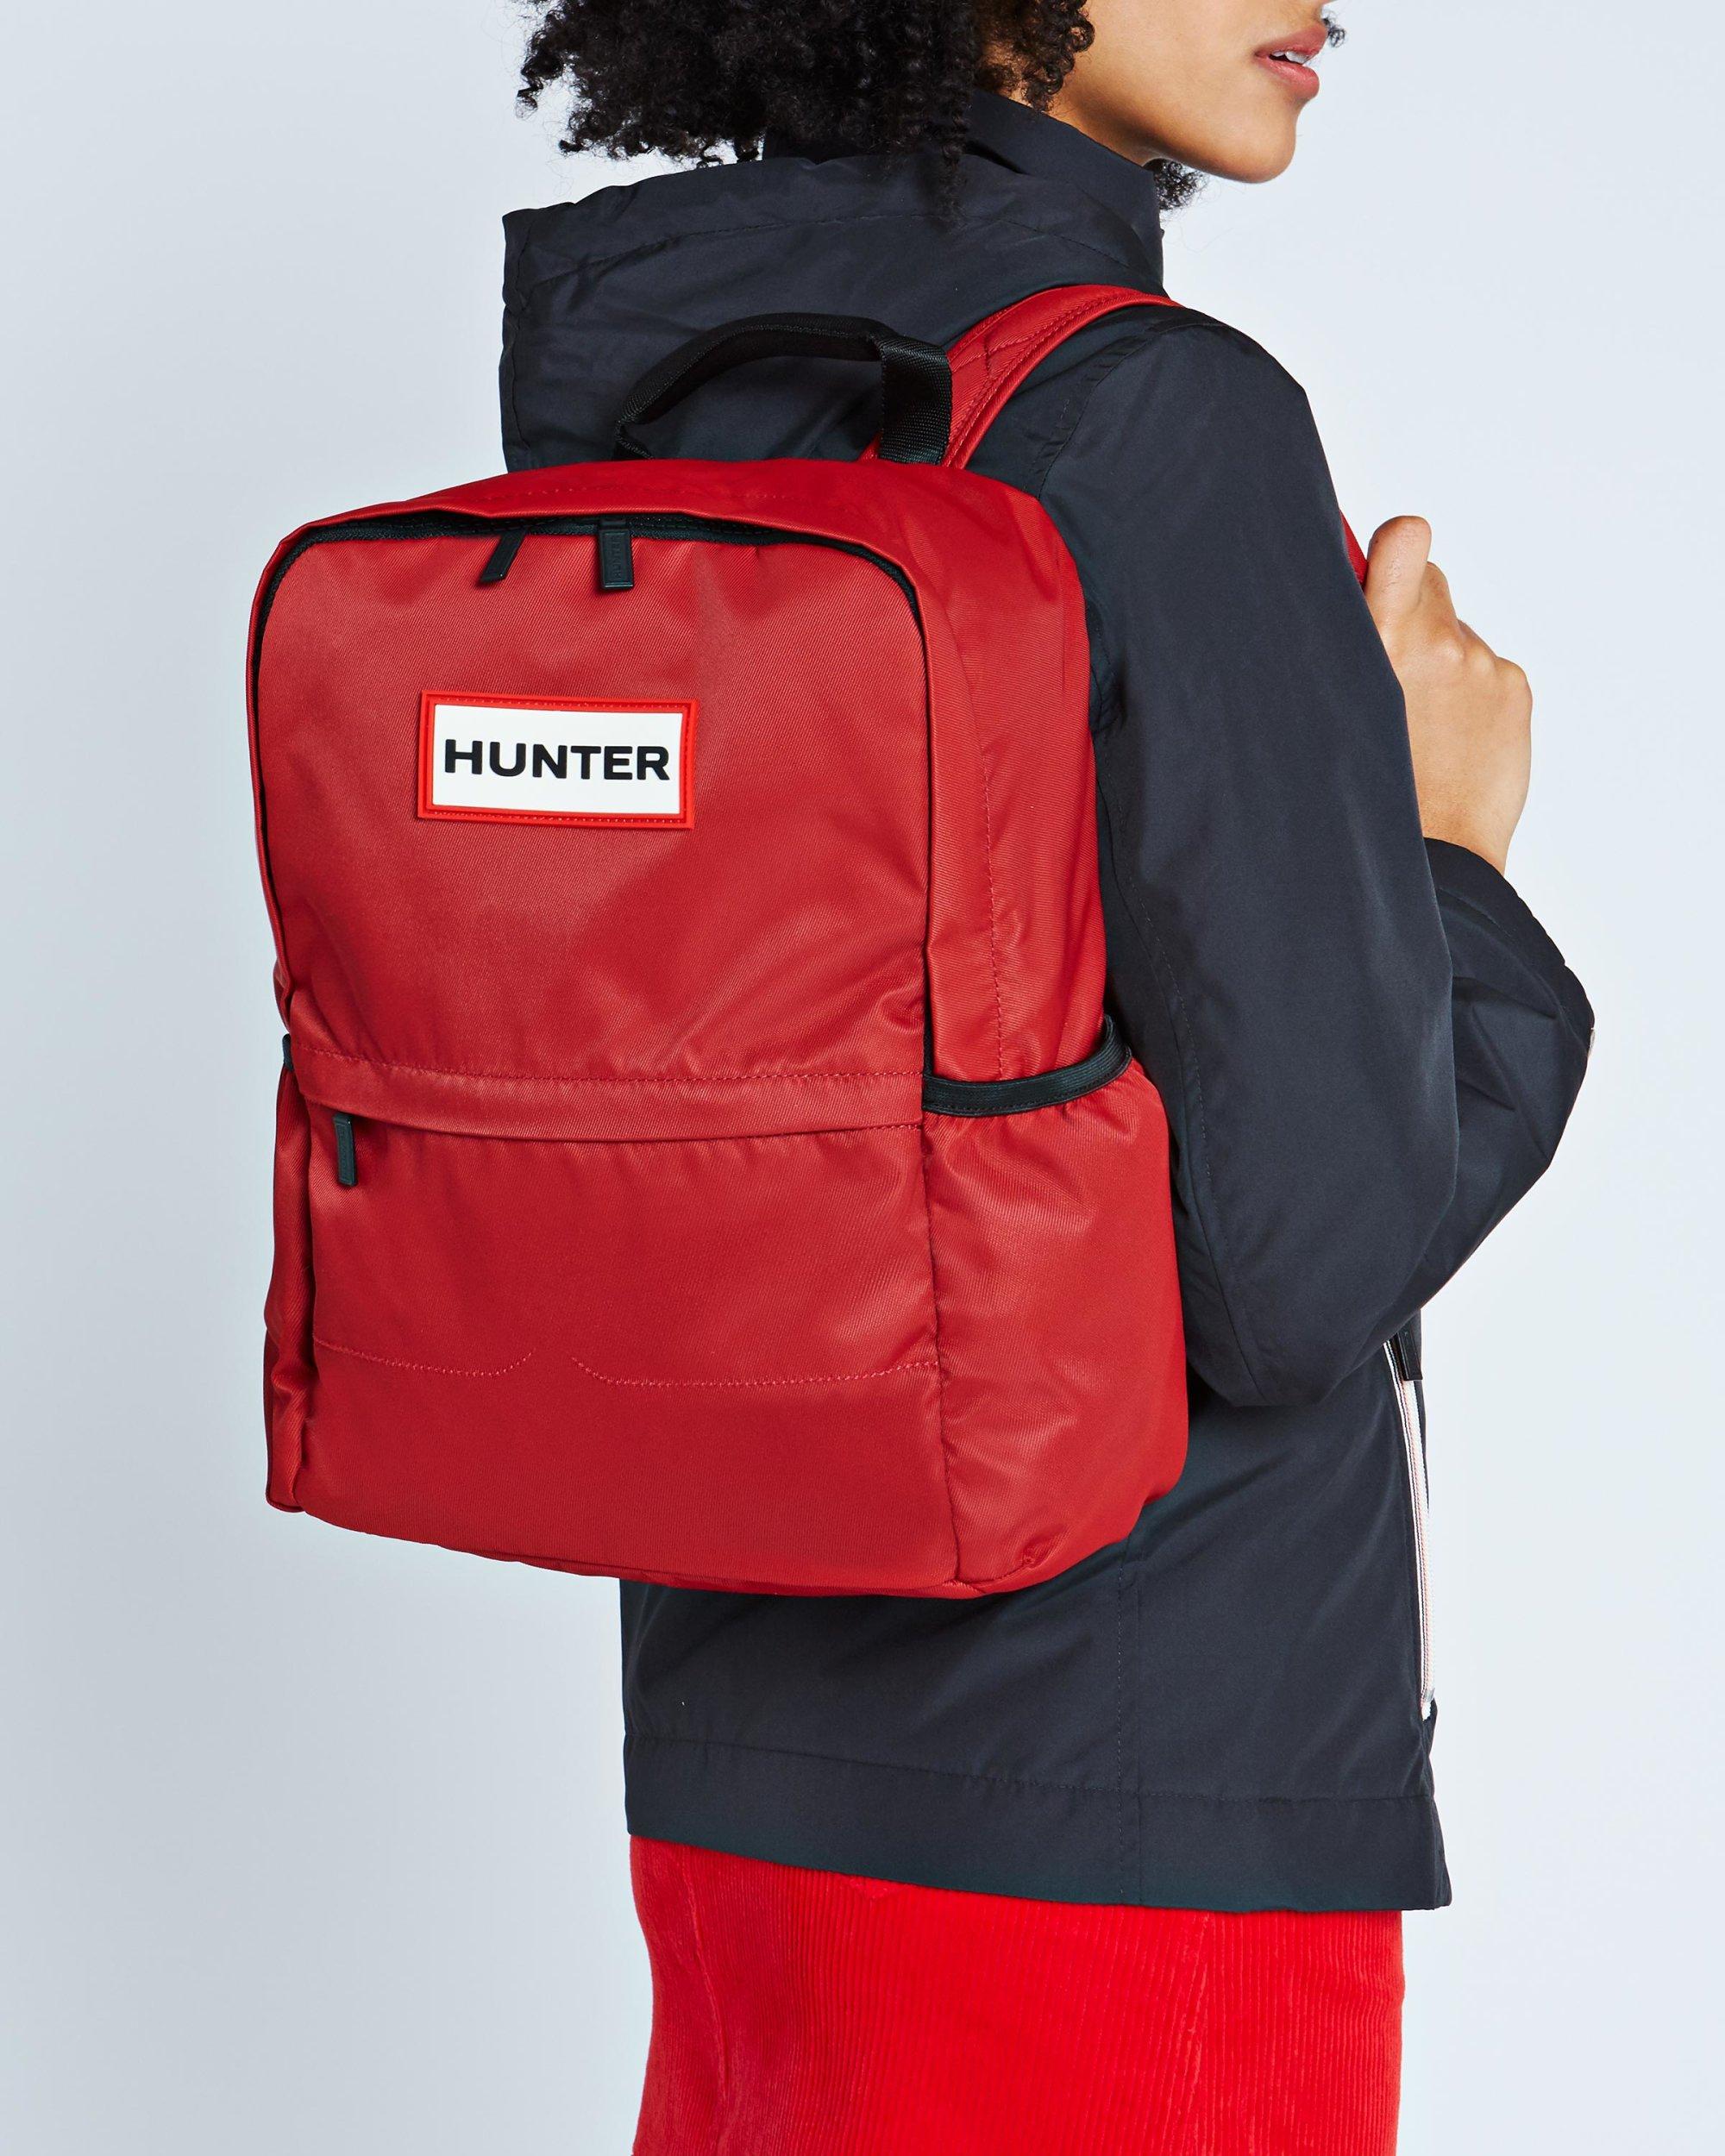 HUNTER Synthetic Nylon Backpack in Military Red (Red) | Lyst